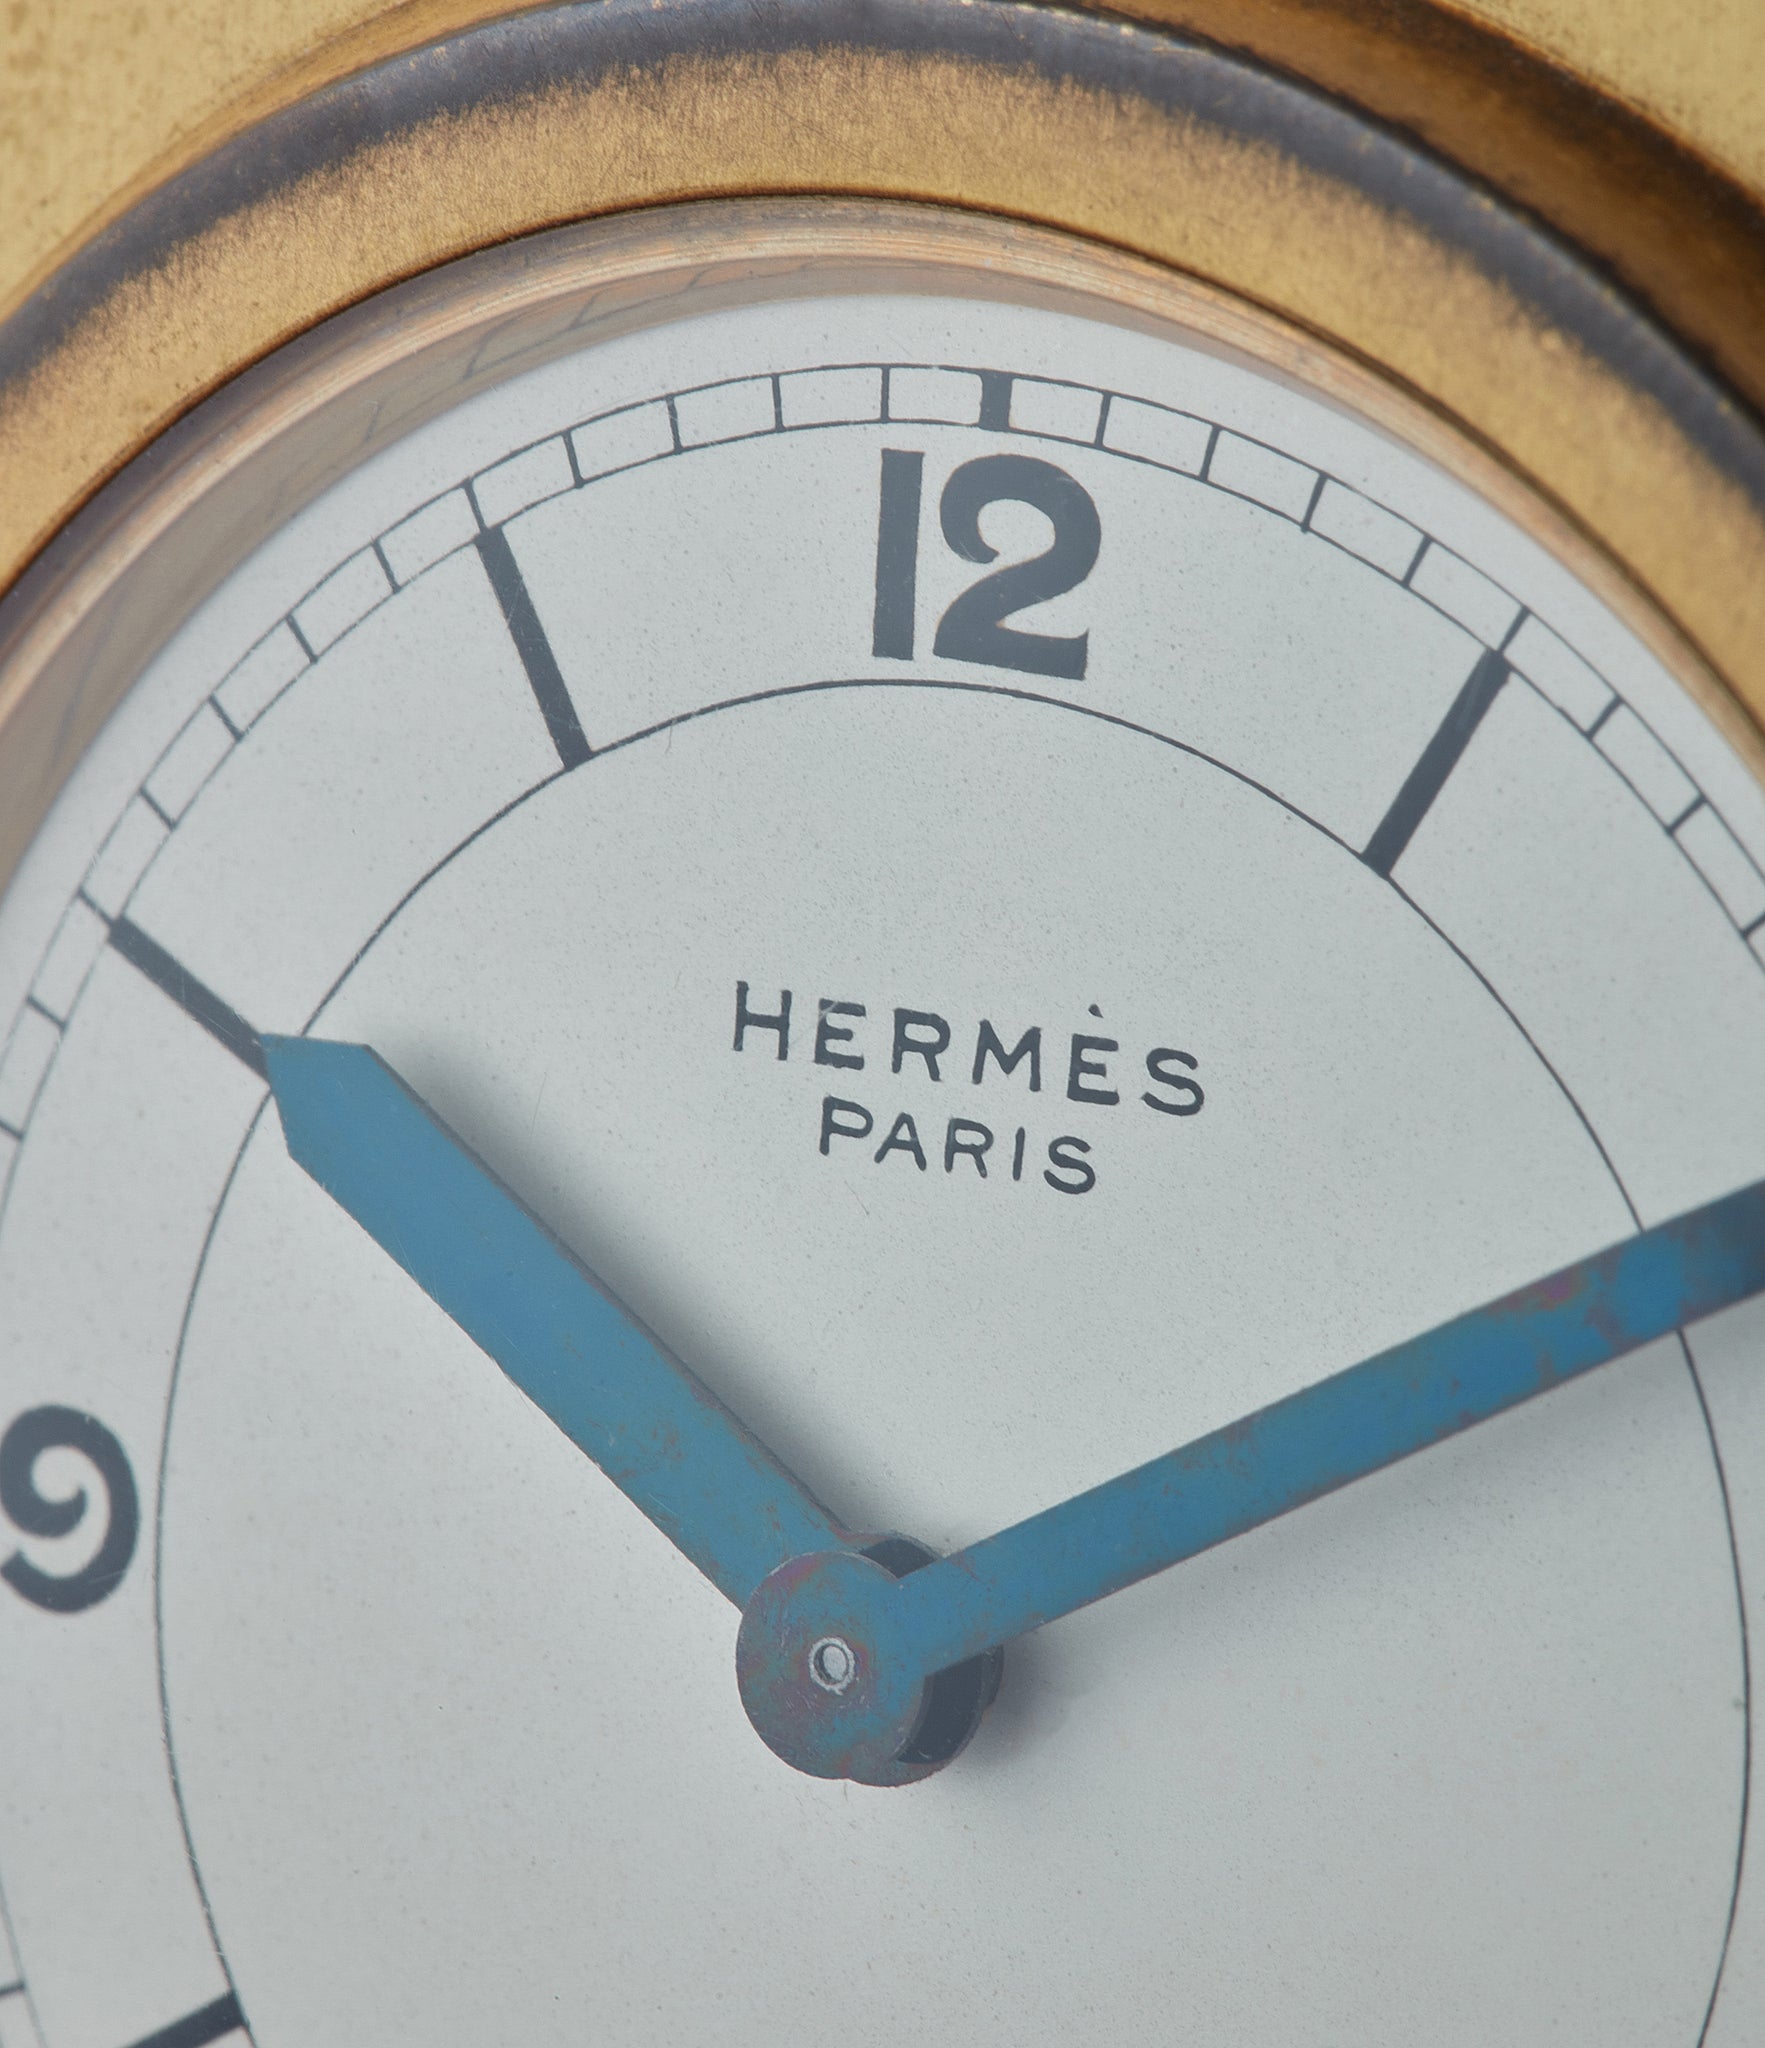 Hermes Paris-signed clock Compendium 8-day Art Deco brass calendar for sale online at A Collected Man for collectors of rare objects